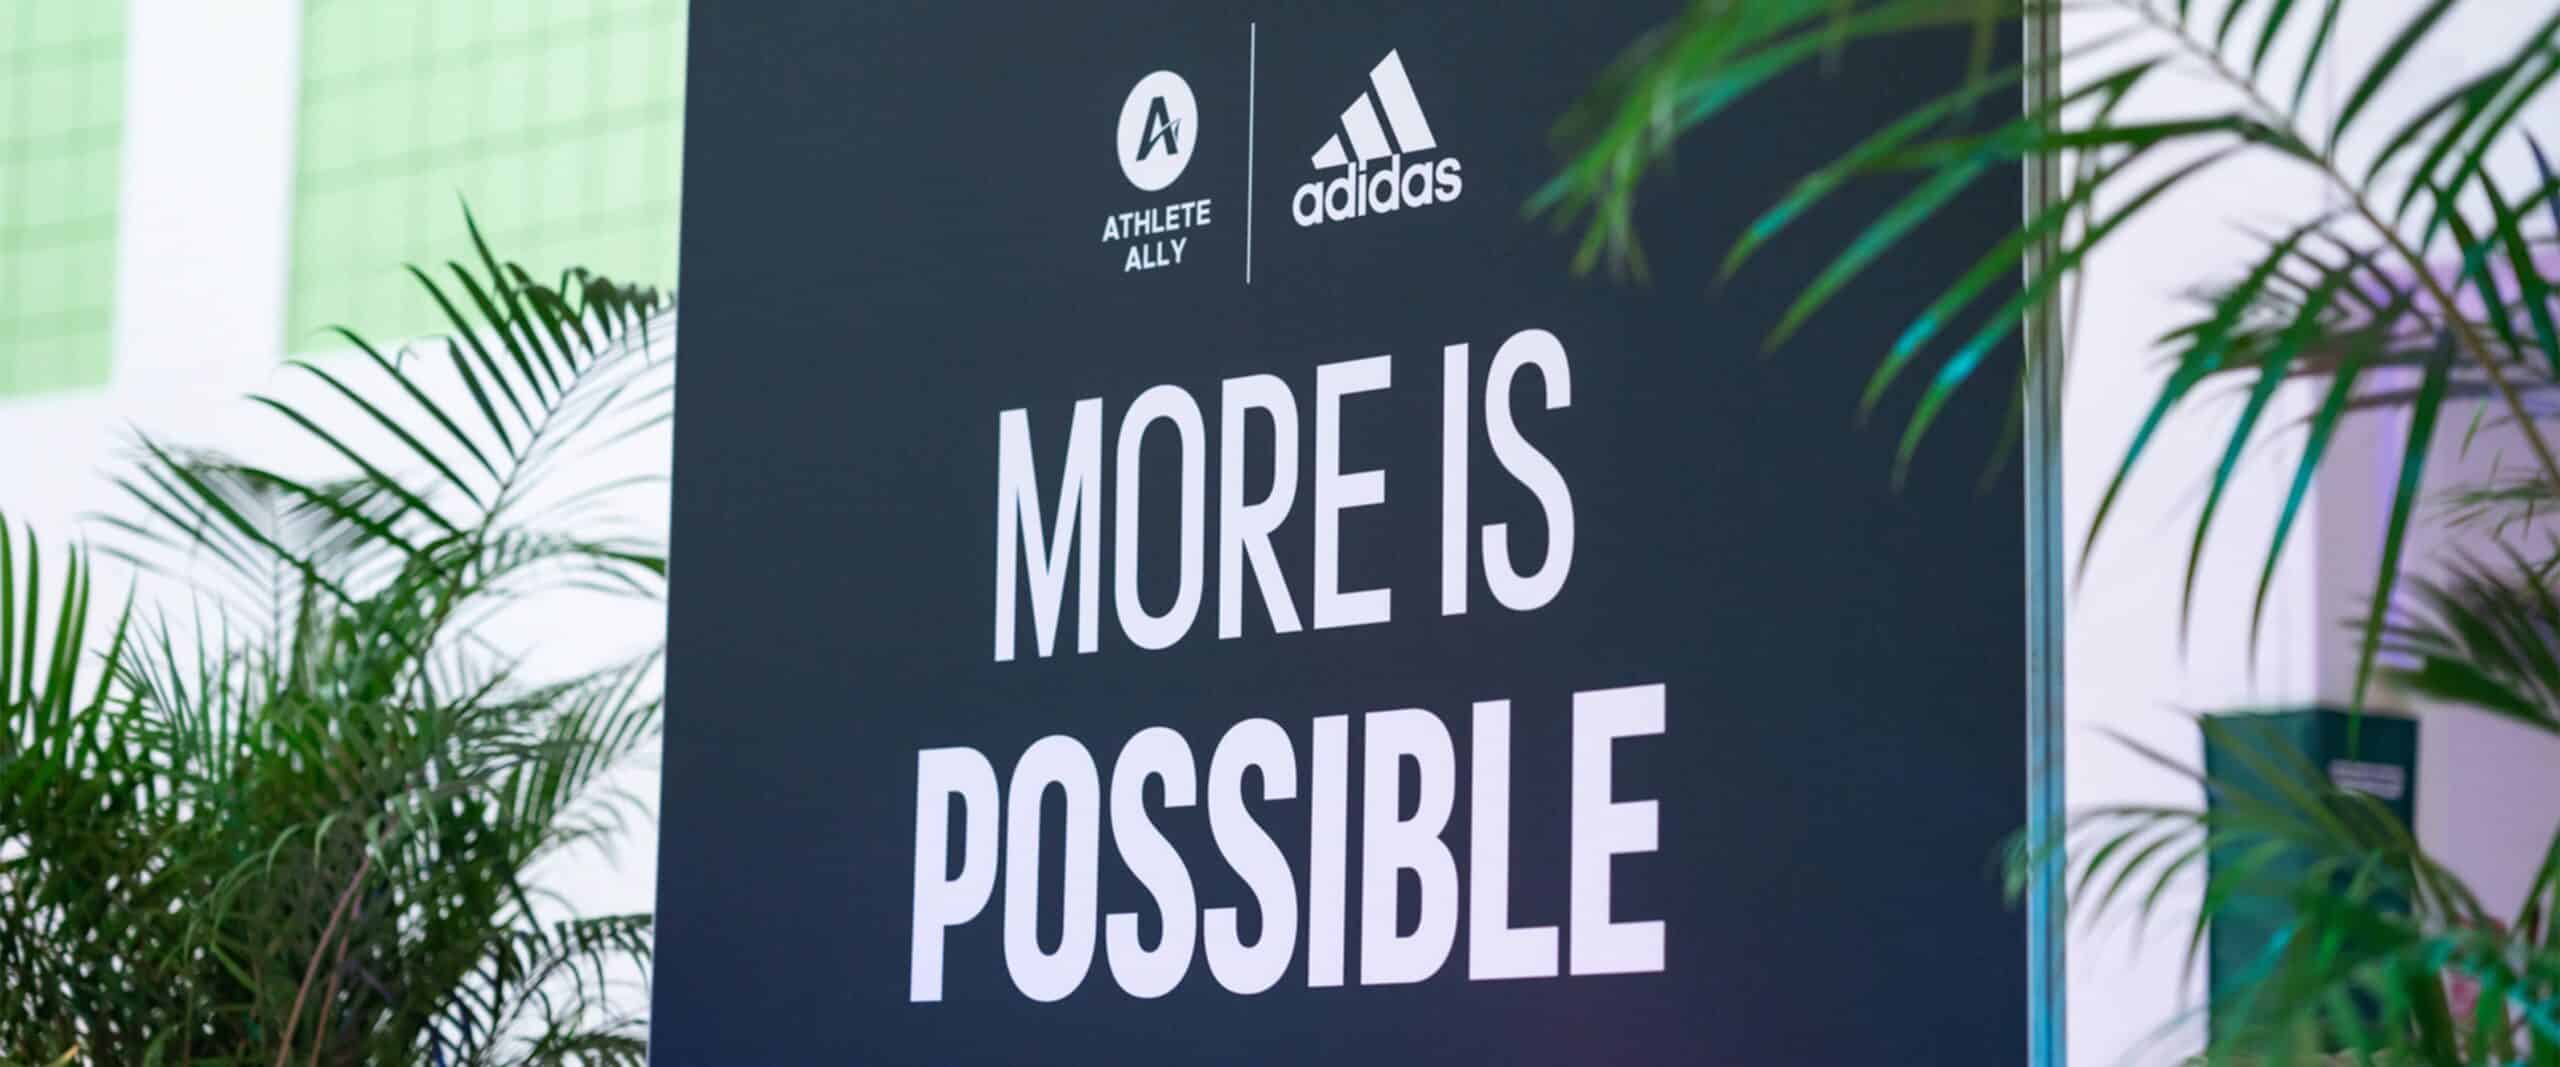 Adidas more is possible logo